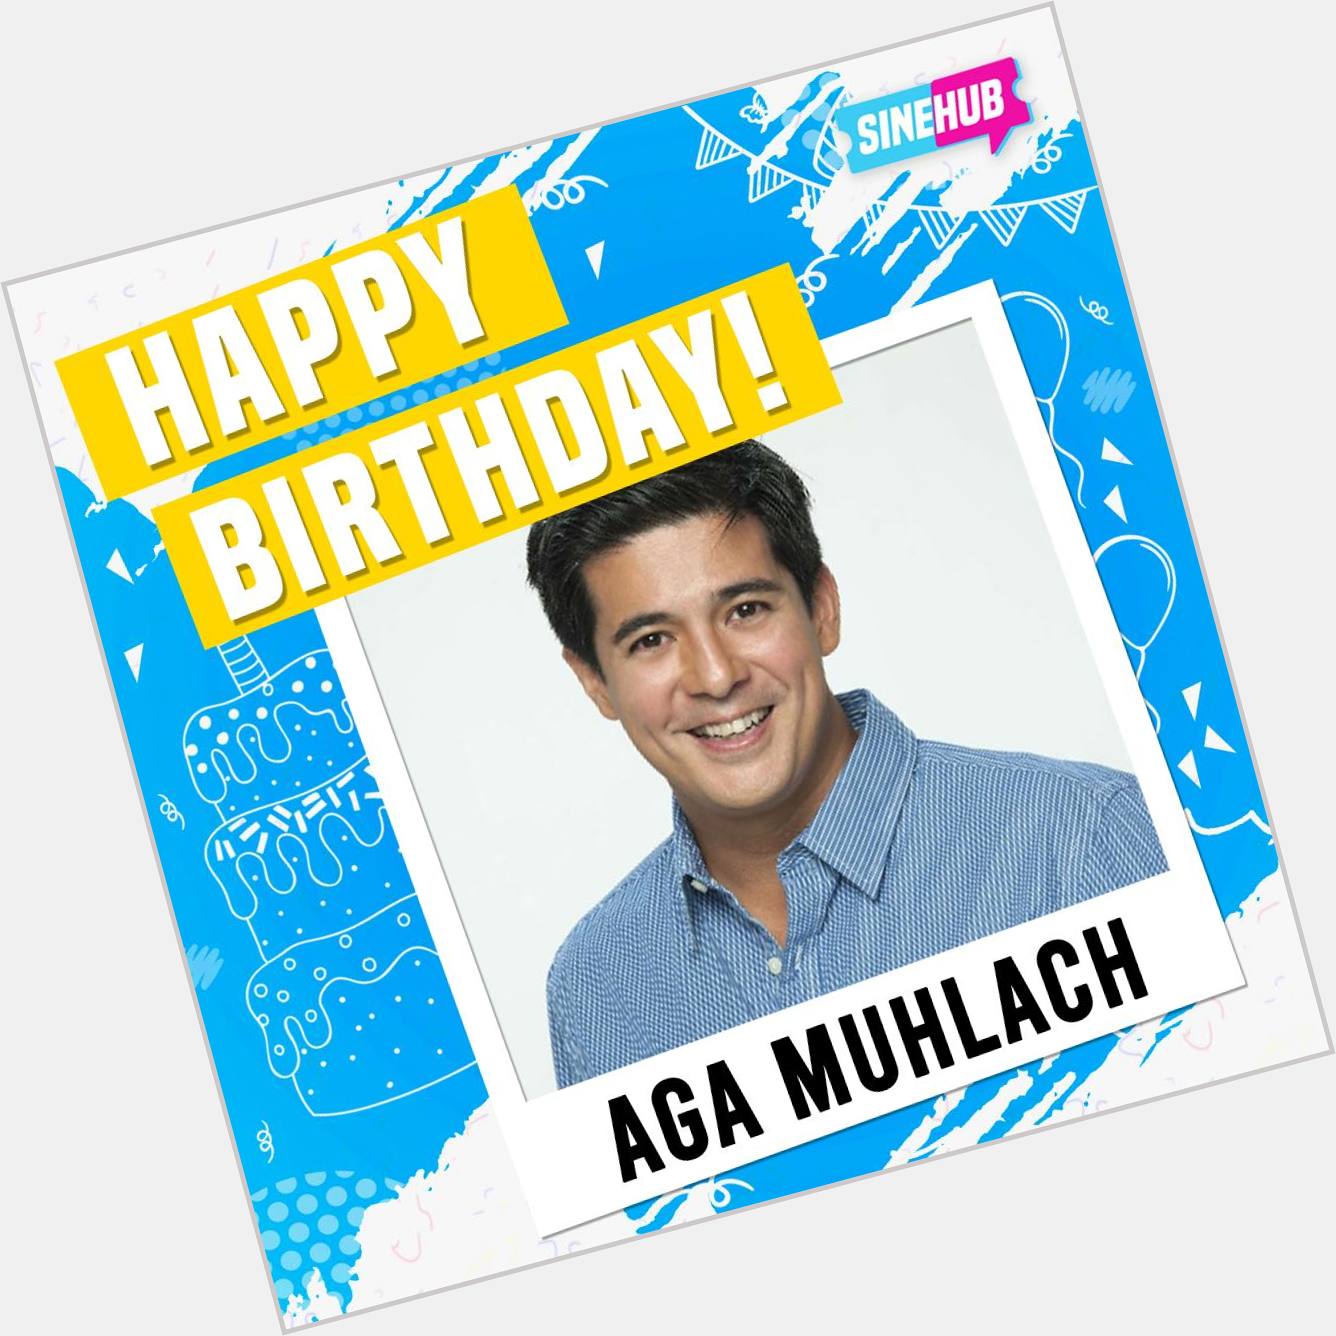 Happy birthday to our crush since the \80s, Aga Muhlach!  